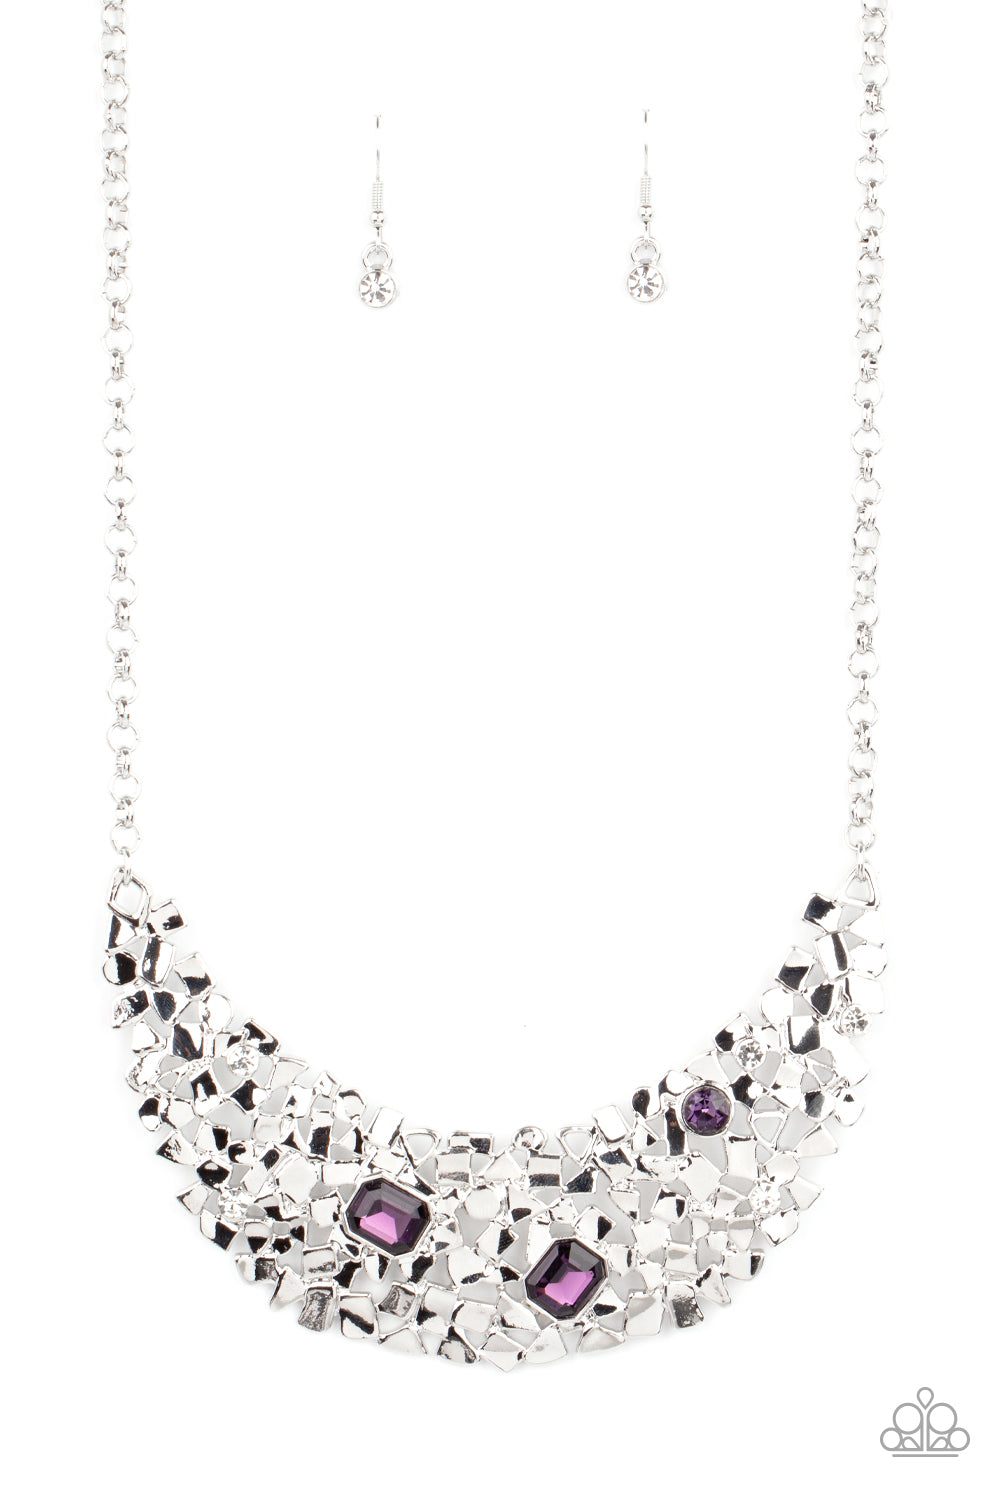 Fabulously Fragmented - Purple Rhinestone Necklaces - Paparazzi Accessories dporadically dotted in mismatched purple and white rhinestones, a smattering of fragmented silver frames coalesce into a bold half moon below the collar for an edgy fashion. Features an adjustable clasp closure.  Sold as one individual necklace. Includes one pair of matching earrings.